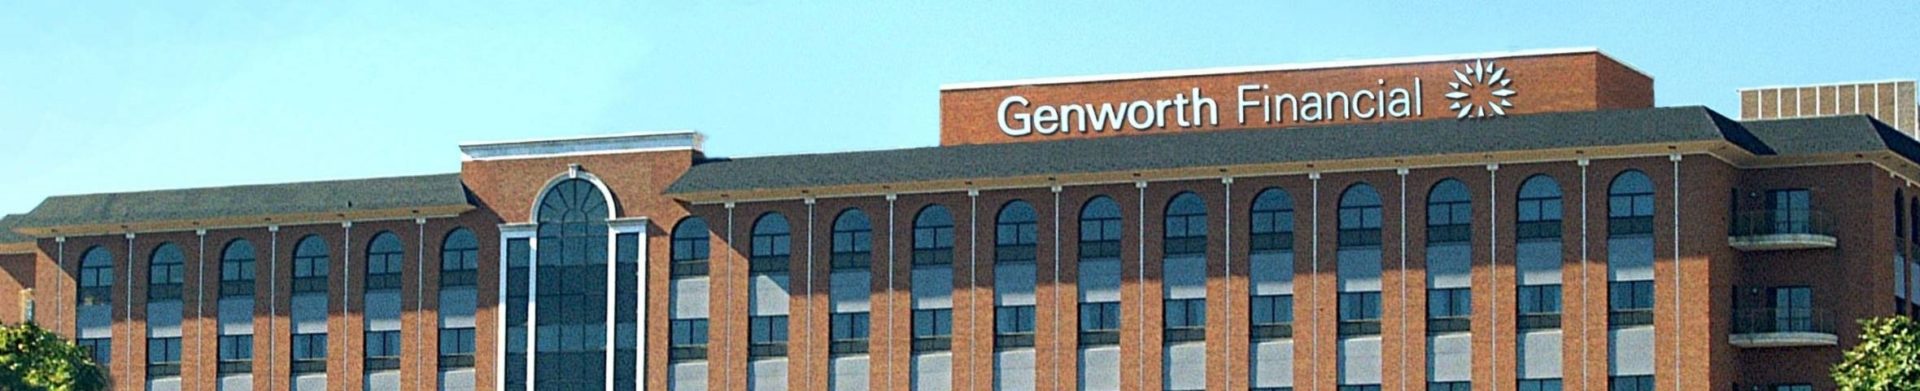 Genworth Financial office building in the daytime